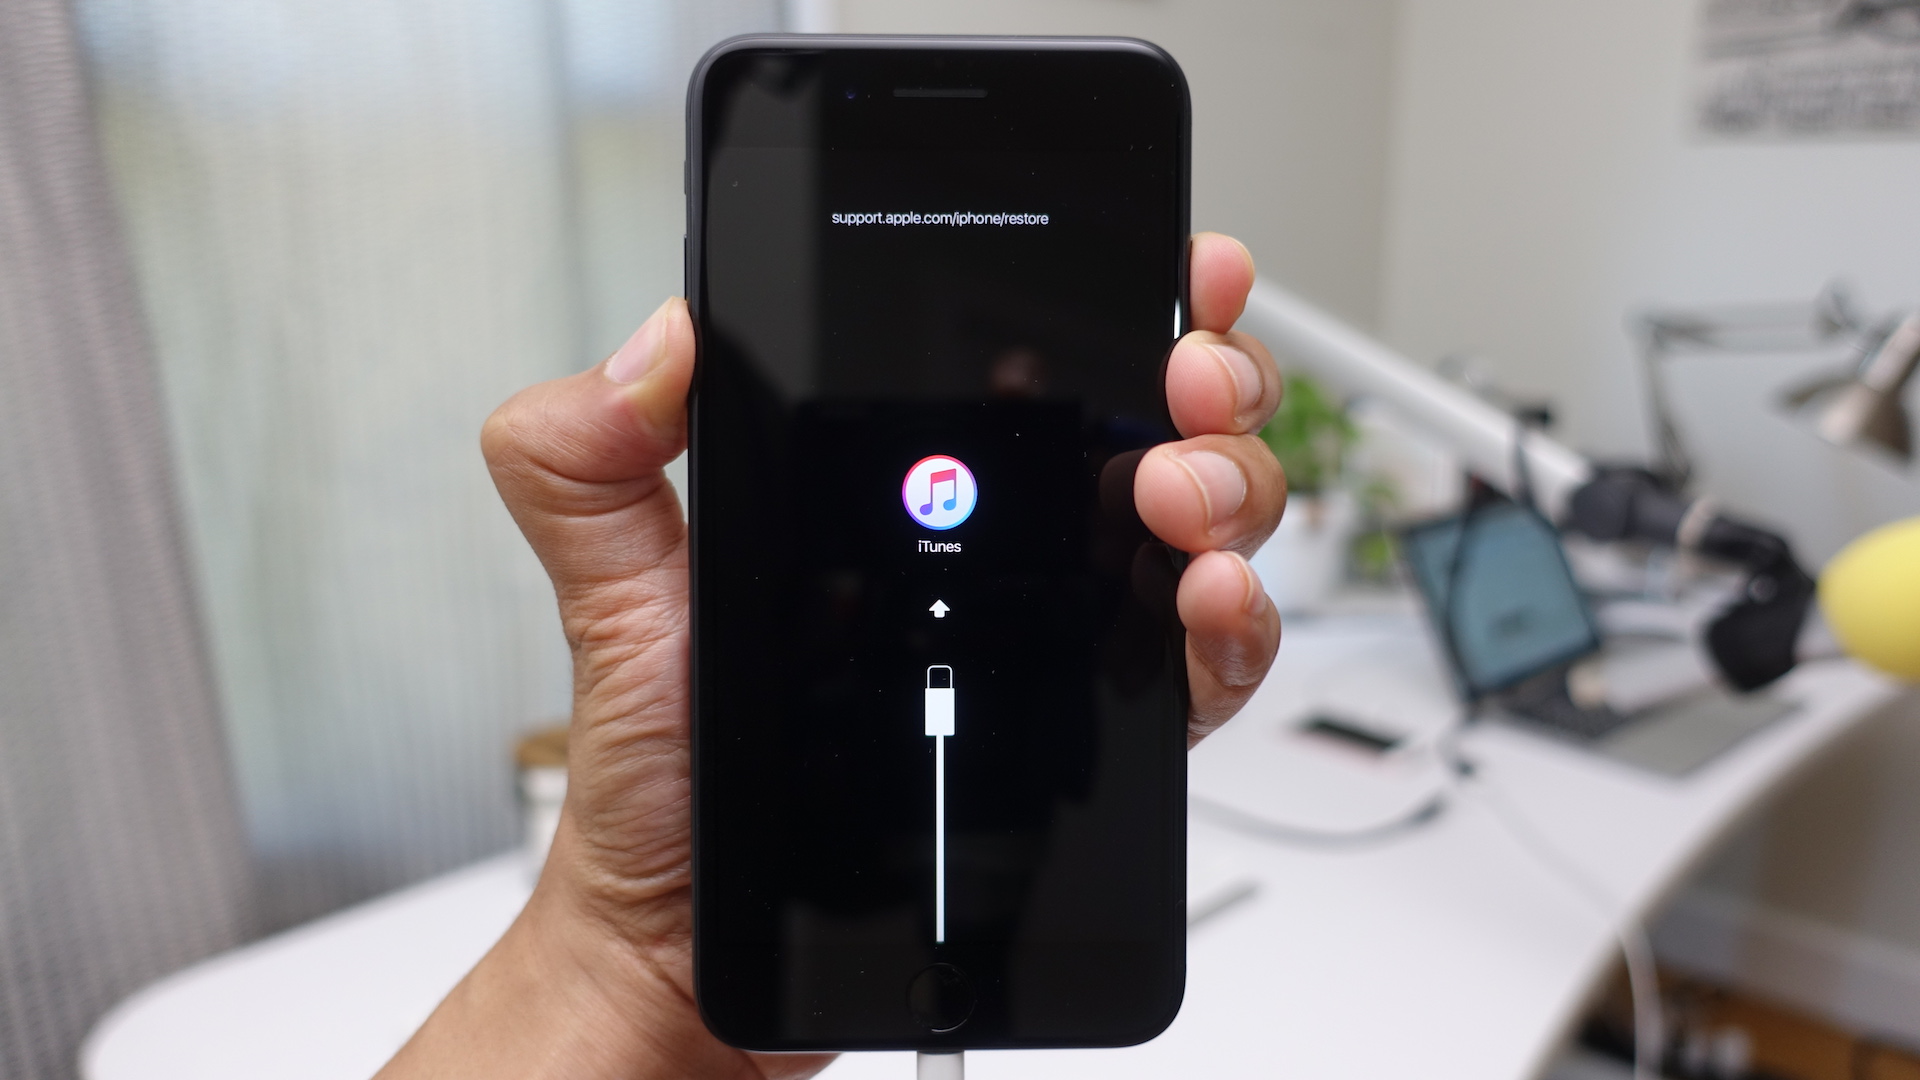 iPhone 5: How to force restart, enter Recovery Mode, and enter DFU